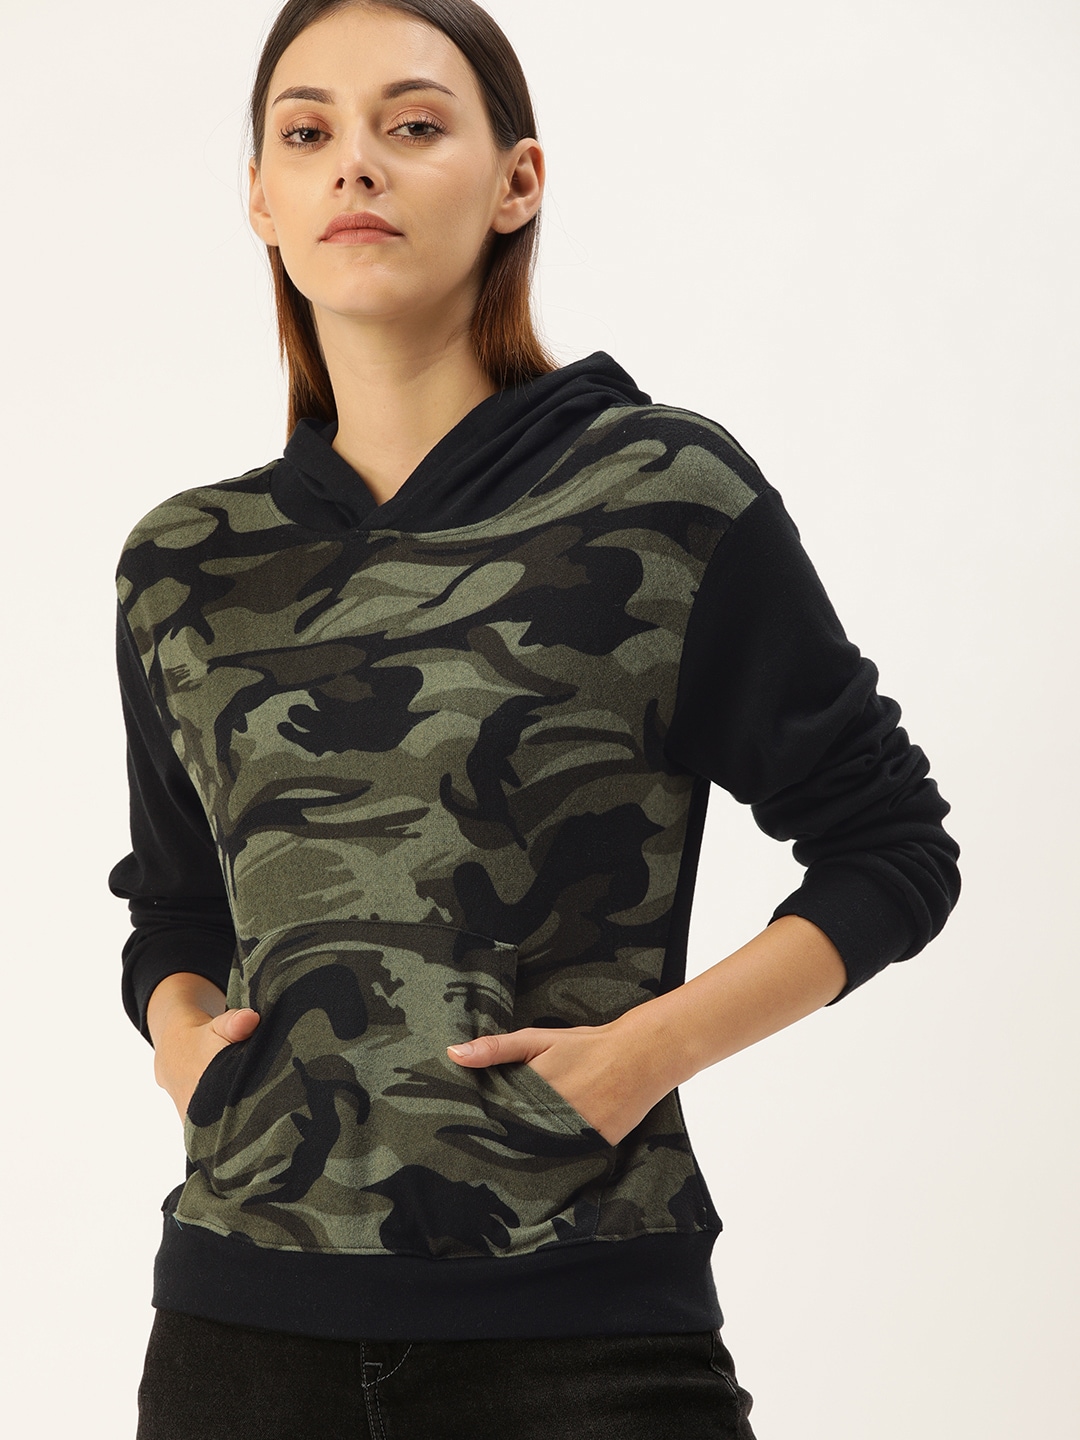 Campus Sutra Women Olive Green & Black Camouflage Printed Hooded Sweatshirt Price in India